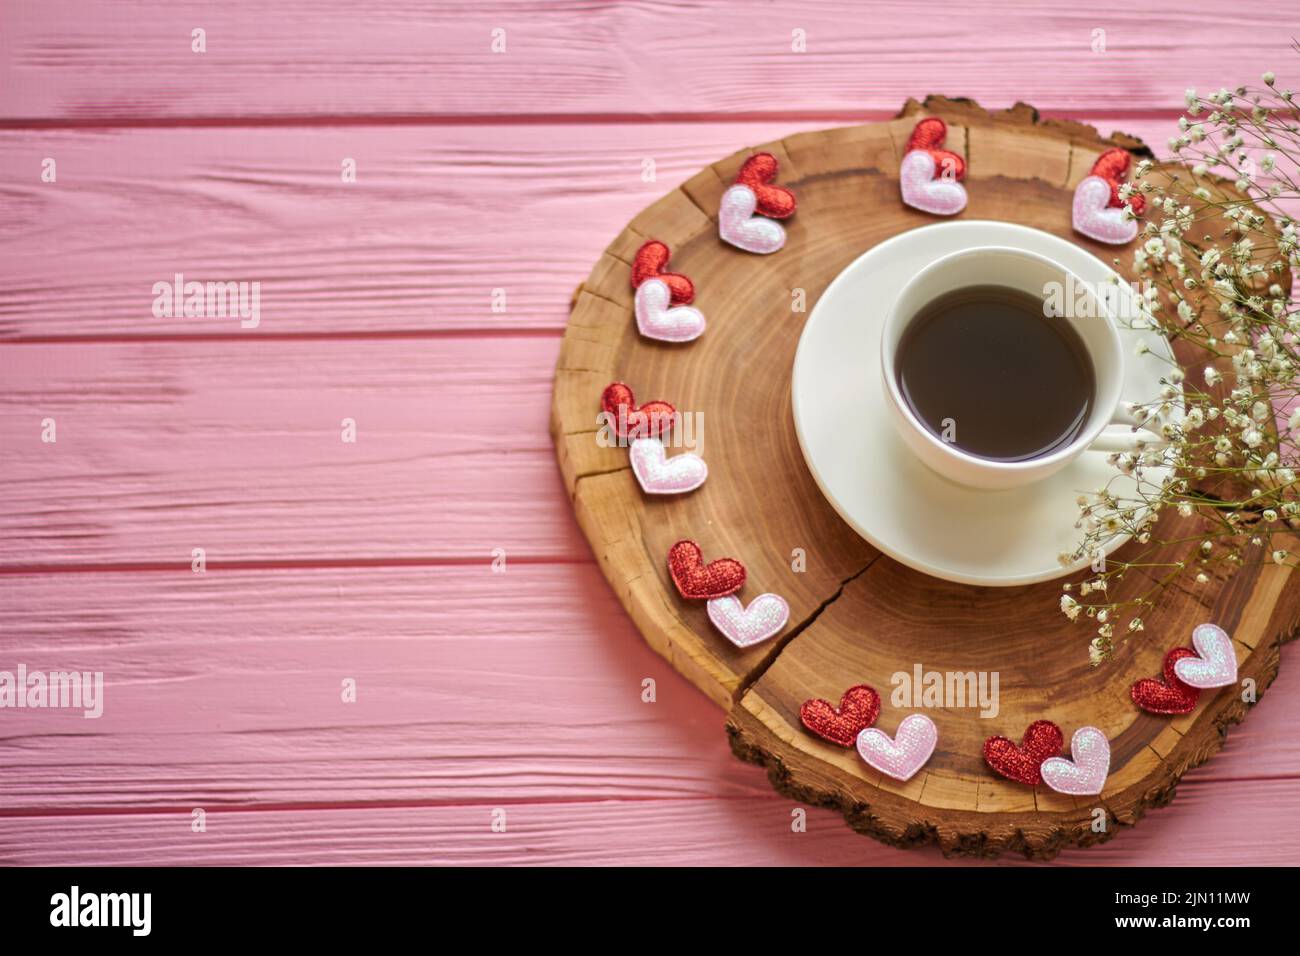 Top view coffee cup with hearts and flowers. Round rustic wooden board. Stock Photo